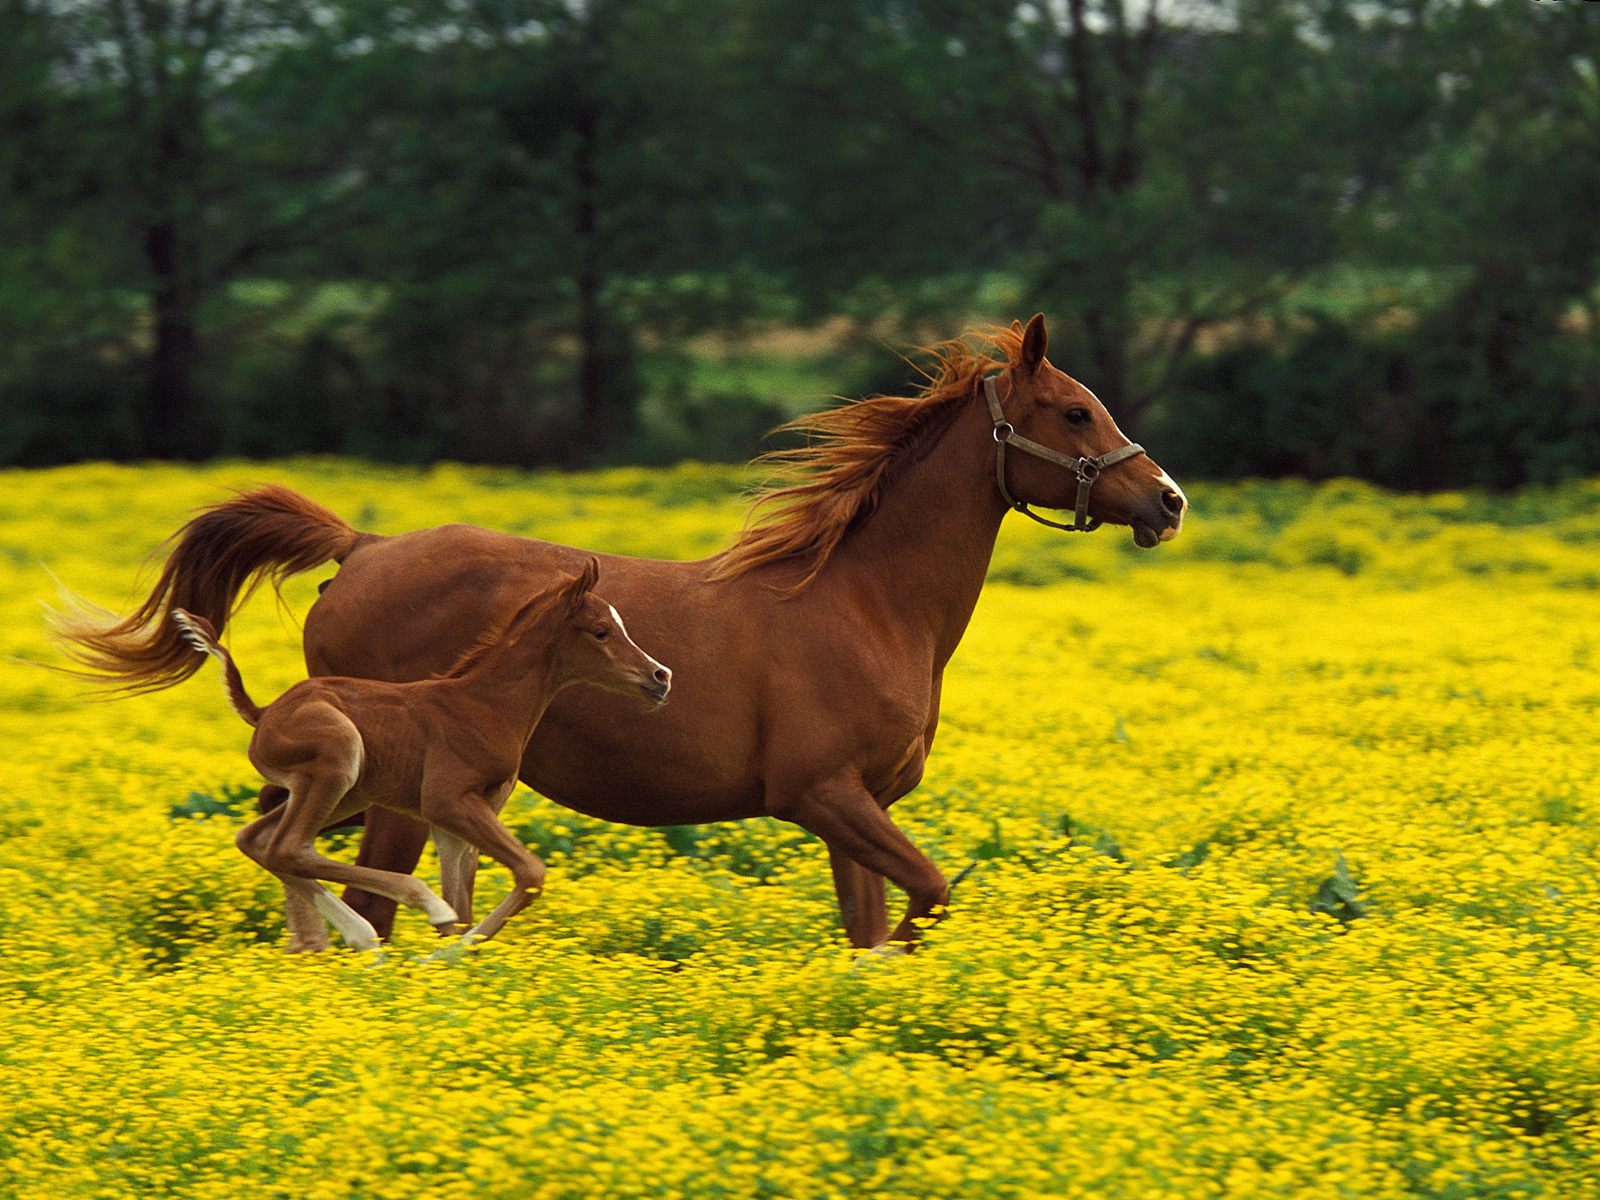 All Wallpapers Beautiful Horse Hd Wallpapers 2013 1600x1200